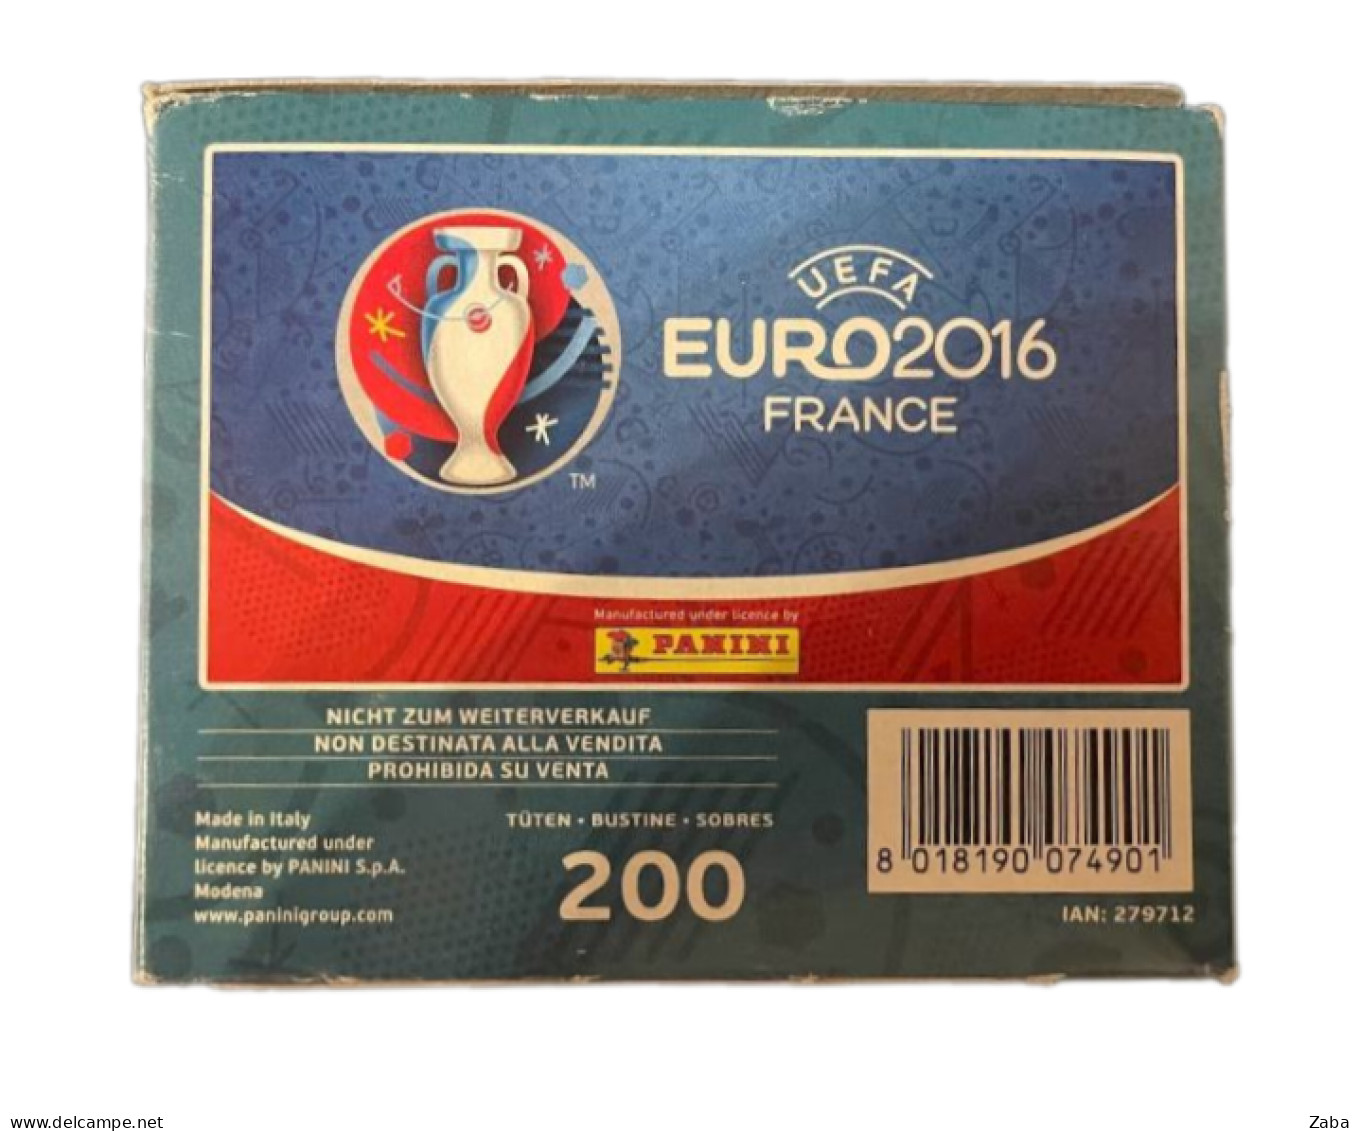 Panini EURO 2016 Lidl Box, 200 Packets, Not Opened! - Italiaanse Uitgave